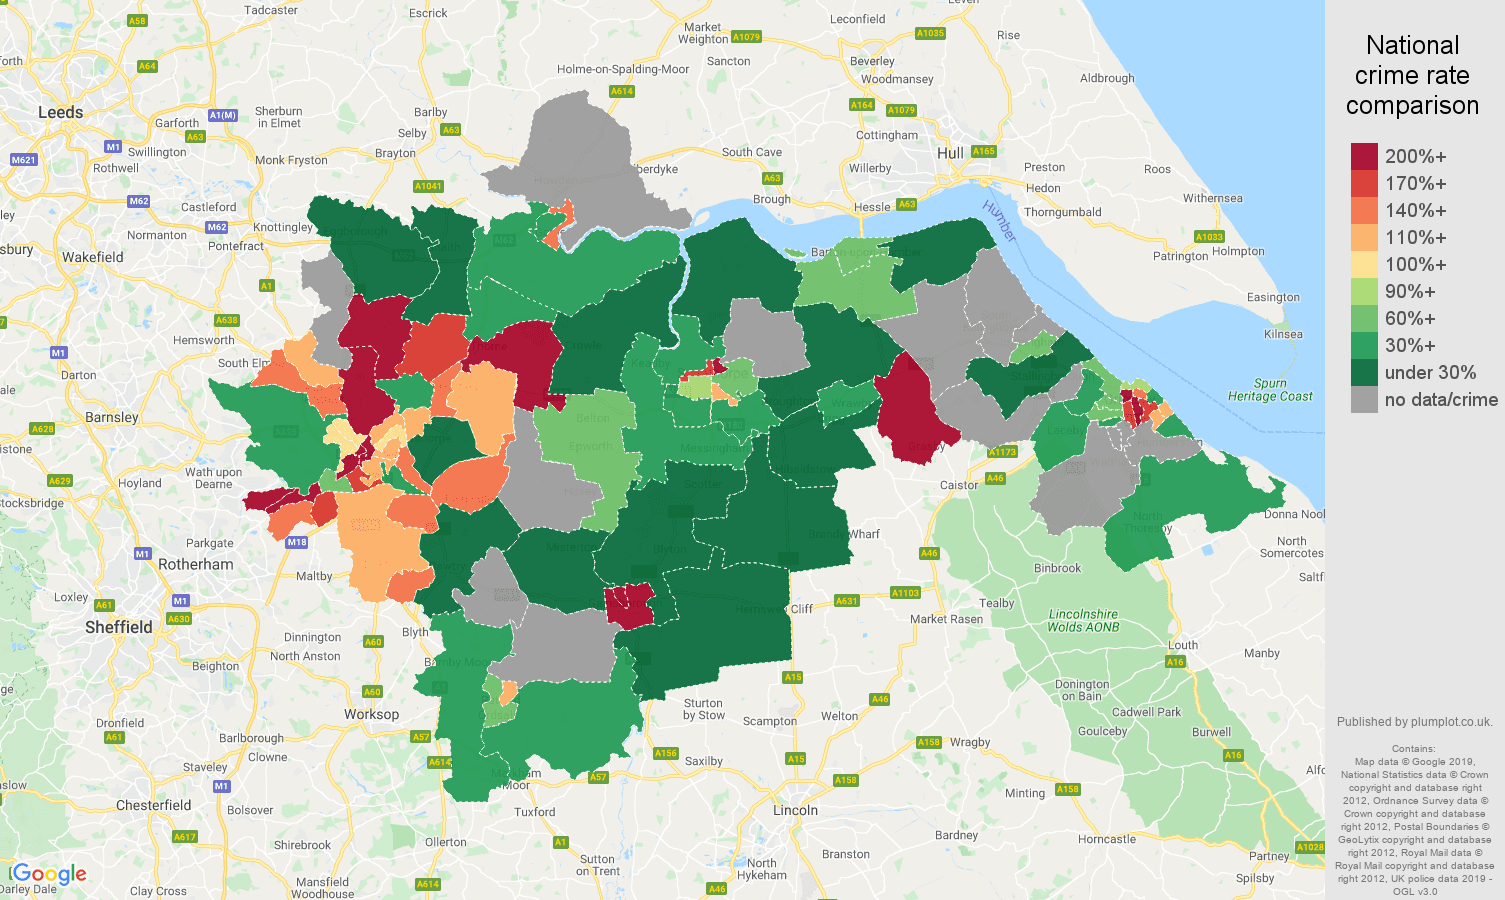 Doncaster possession of weapons crime rate comparison map